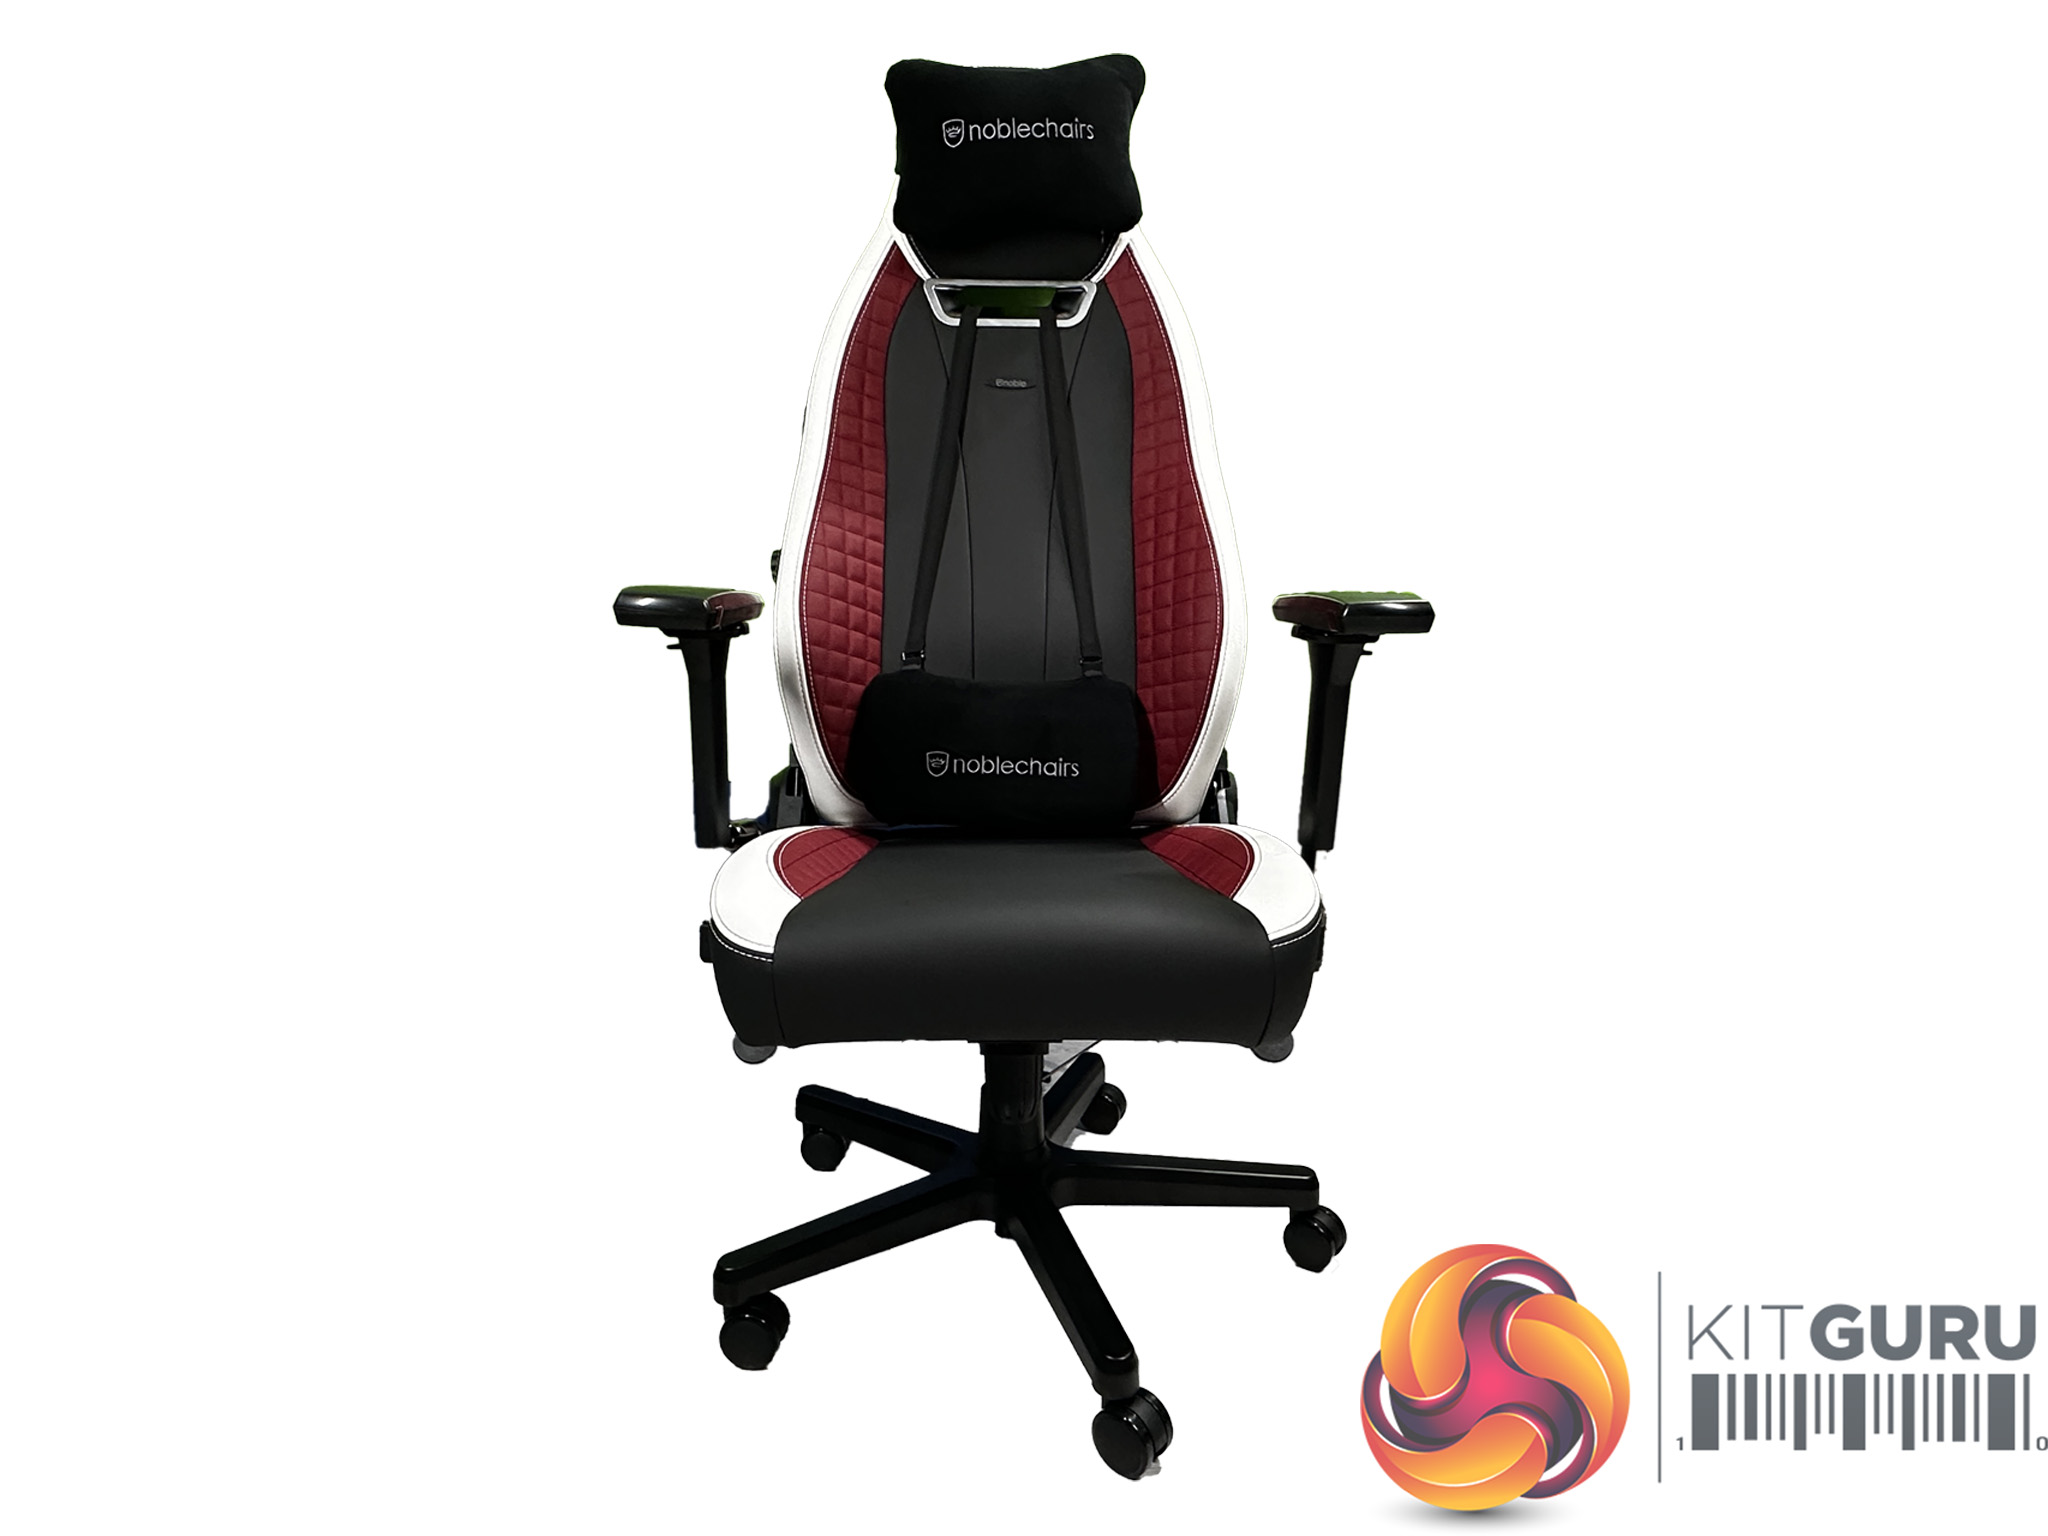 Noblechairs Augments Gaming Chair Range With New Footrest Line